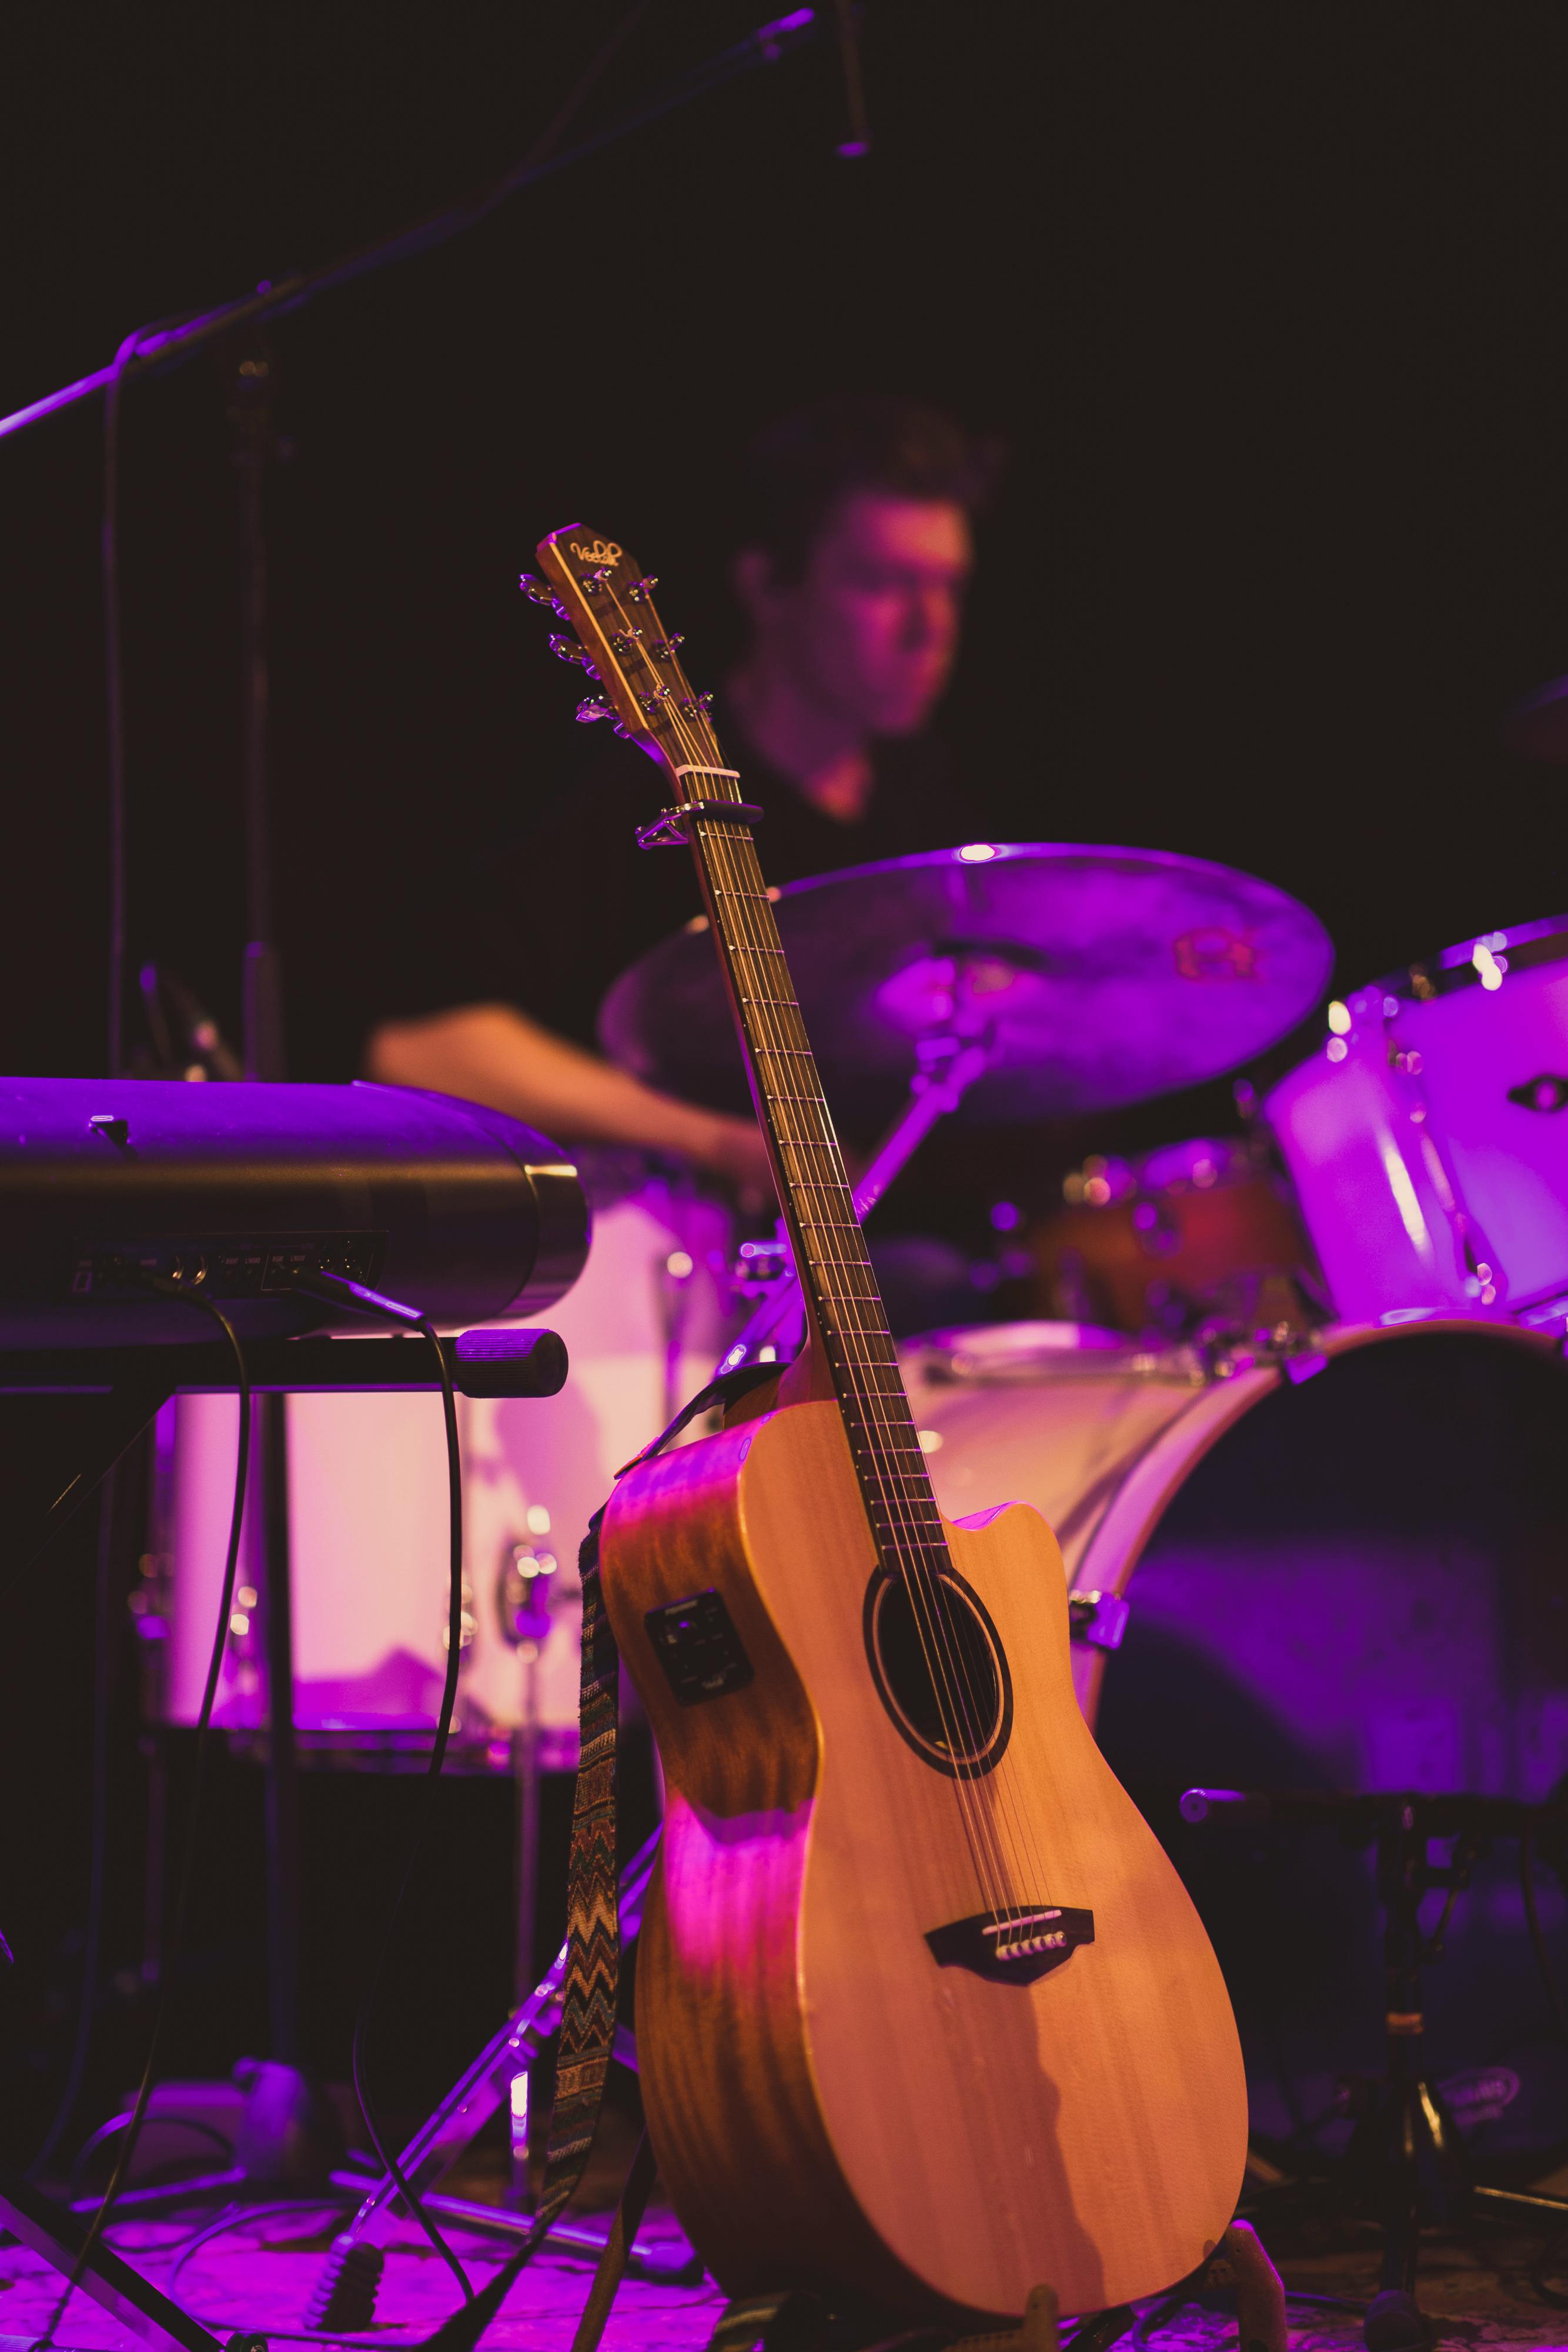 musician playing drums on stage near guitar